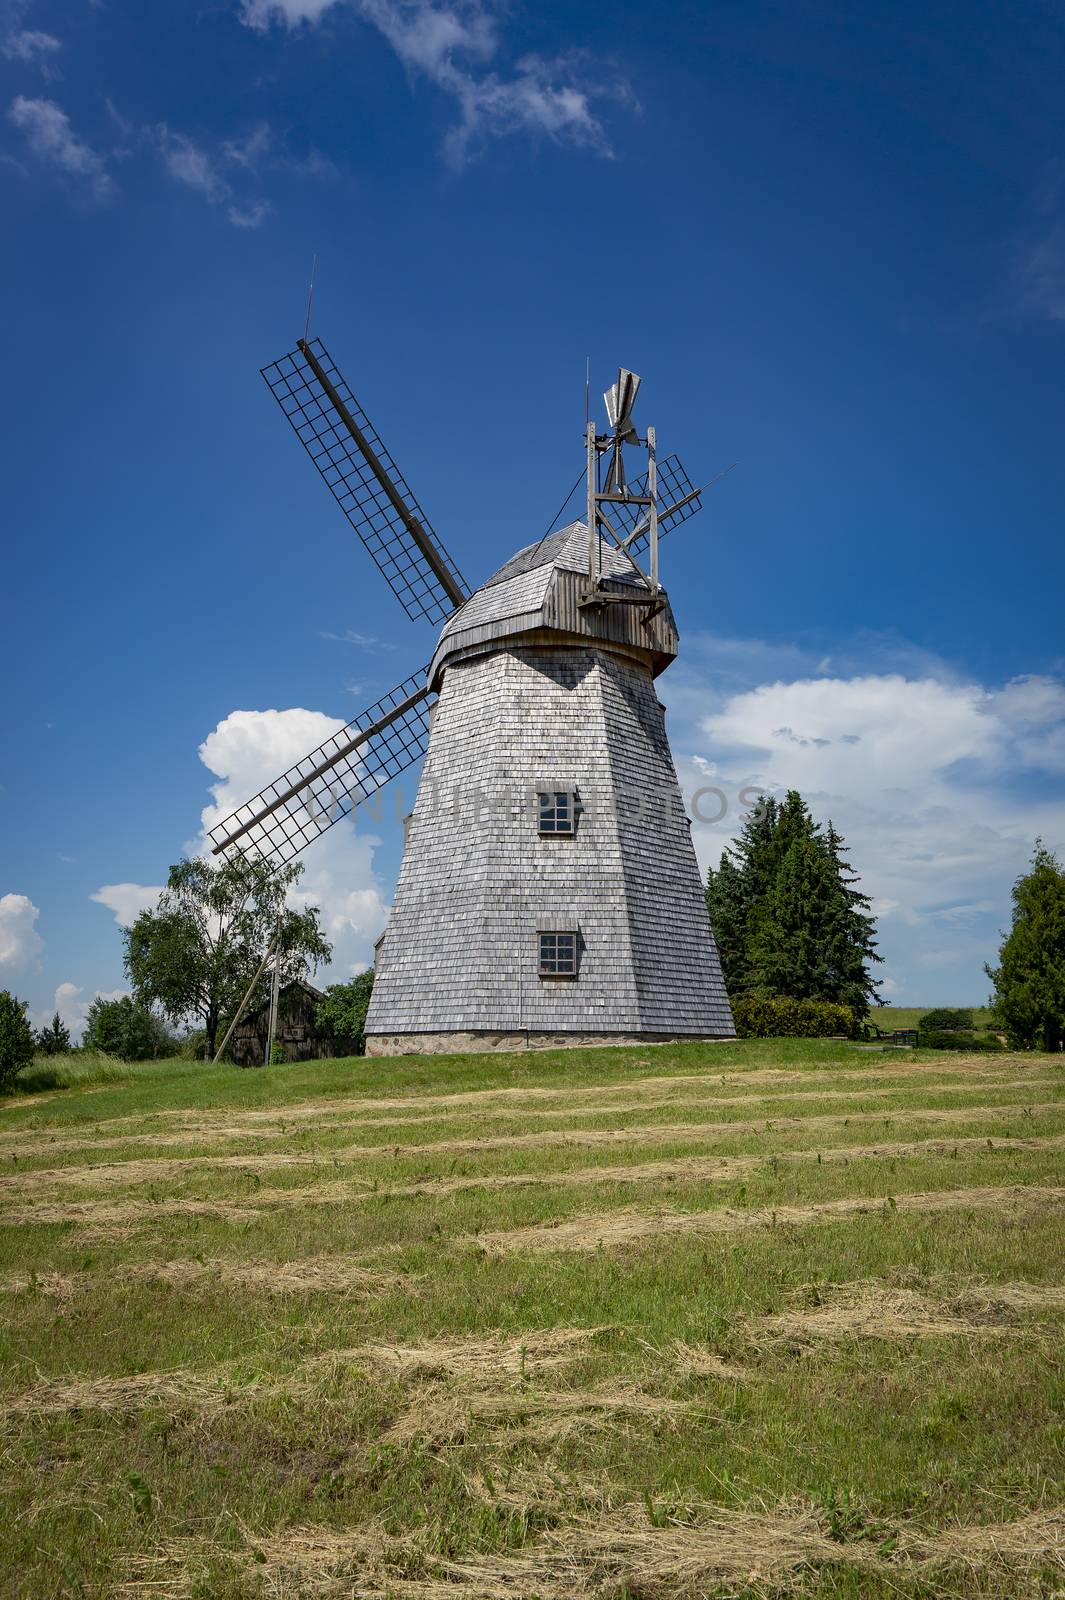 Old windmill in a country landscape by NetPix